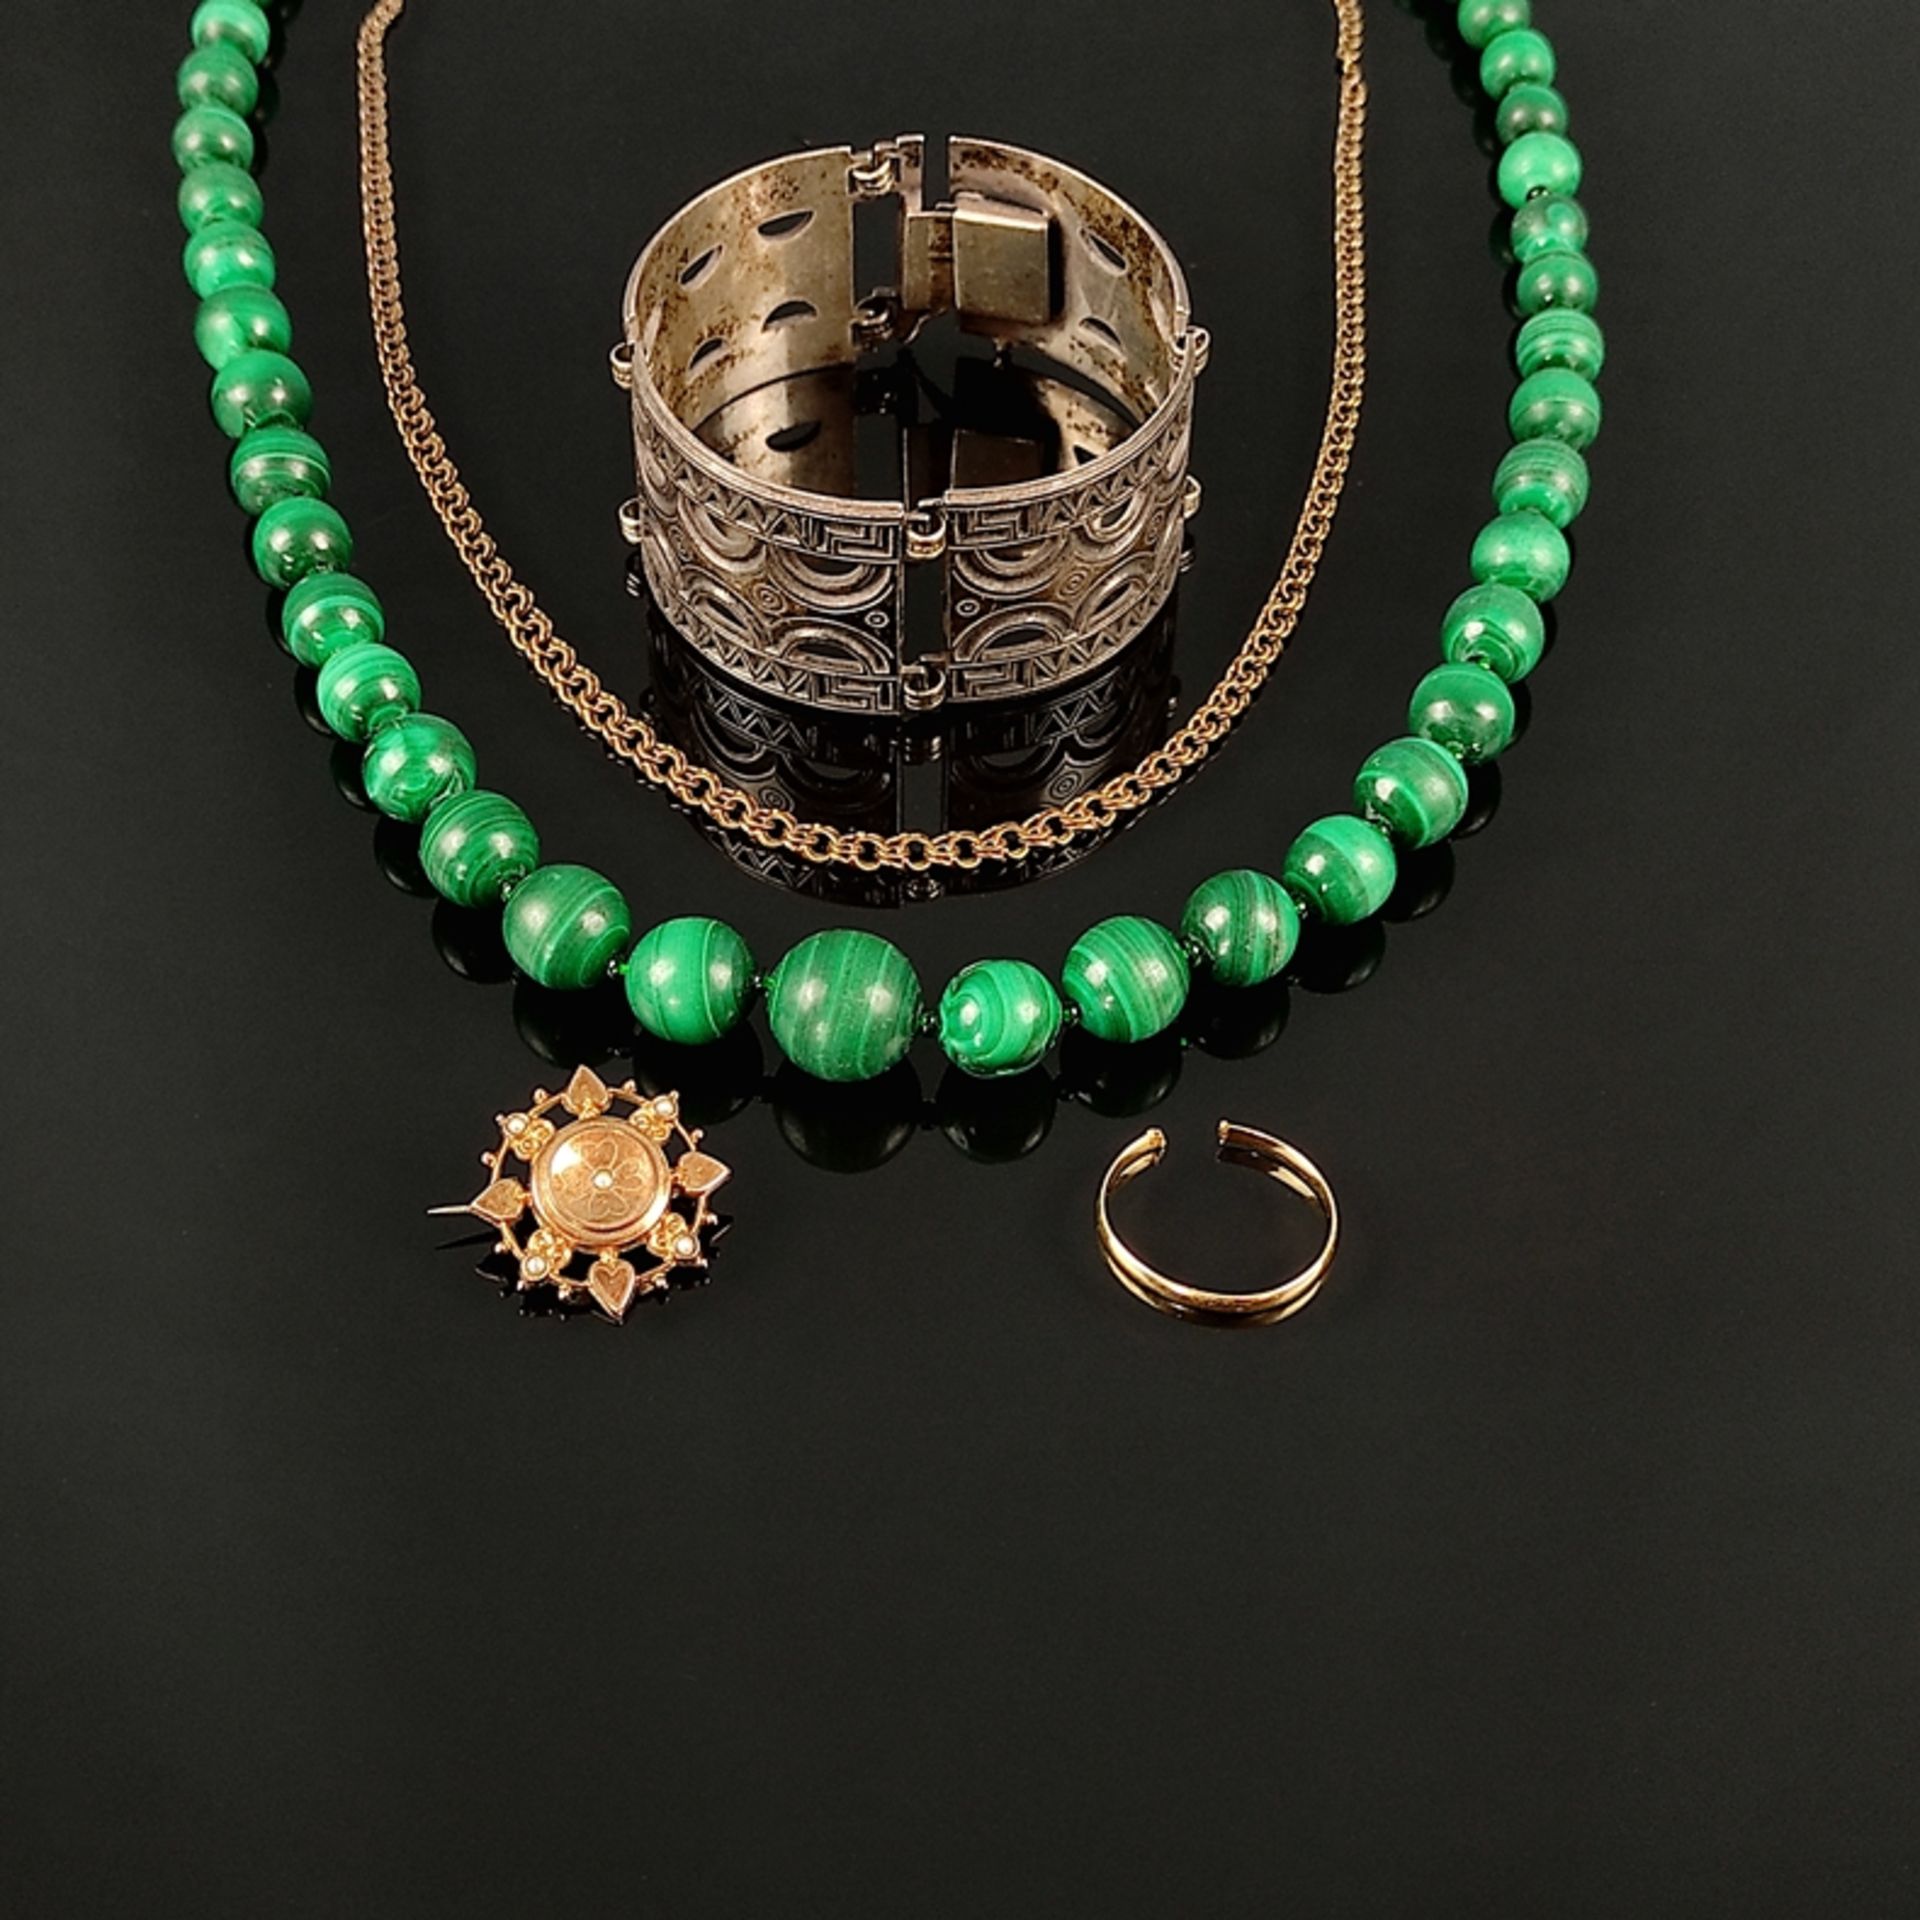 Jewelry convolute, 5 pieces, consisting of malachite necklace, length 56cm, sterling silver bracele